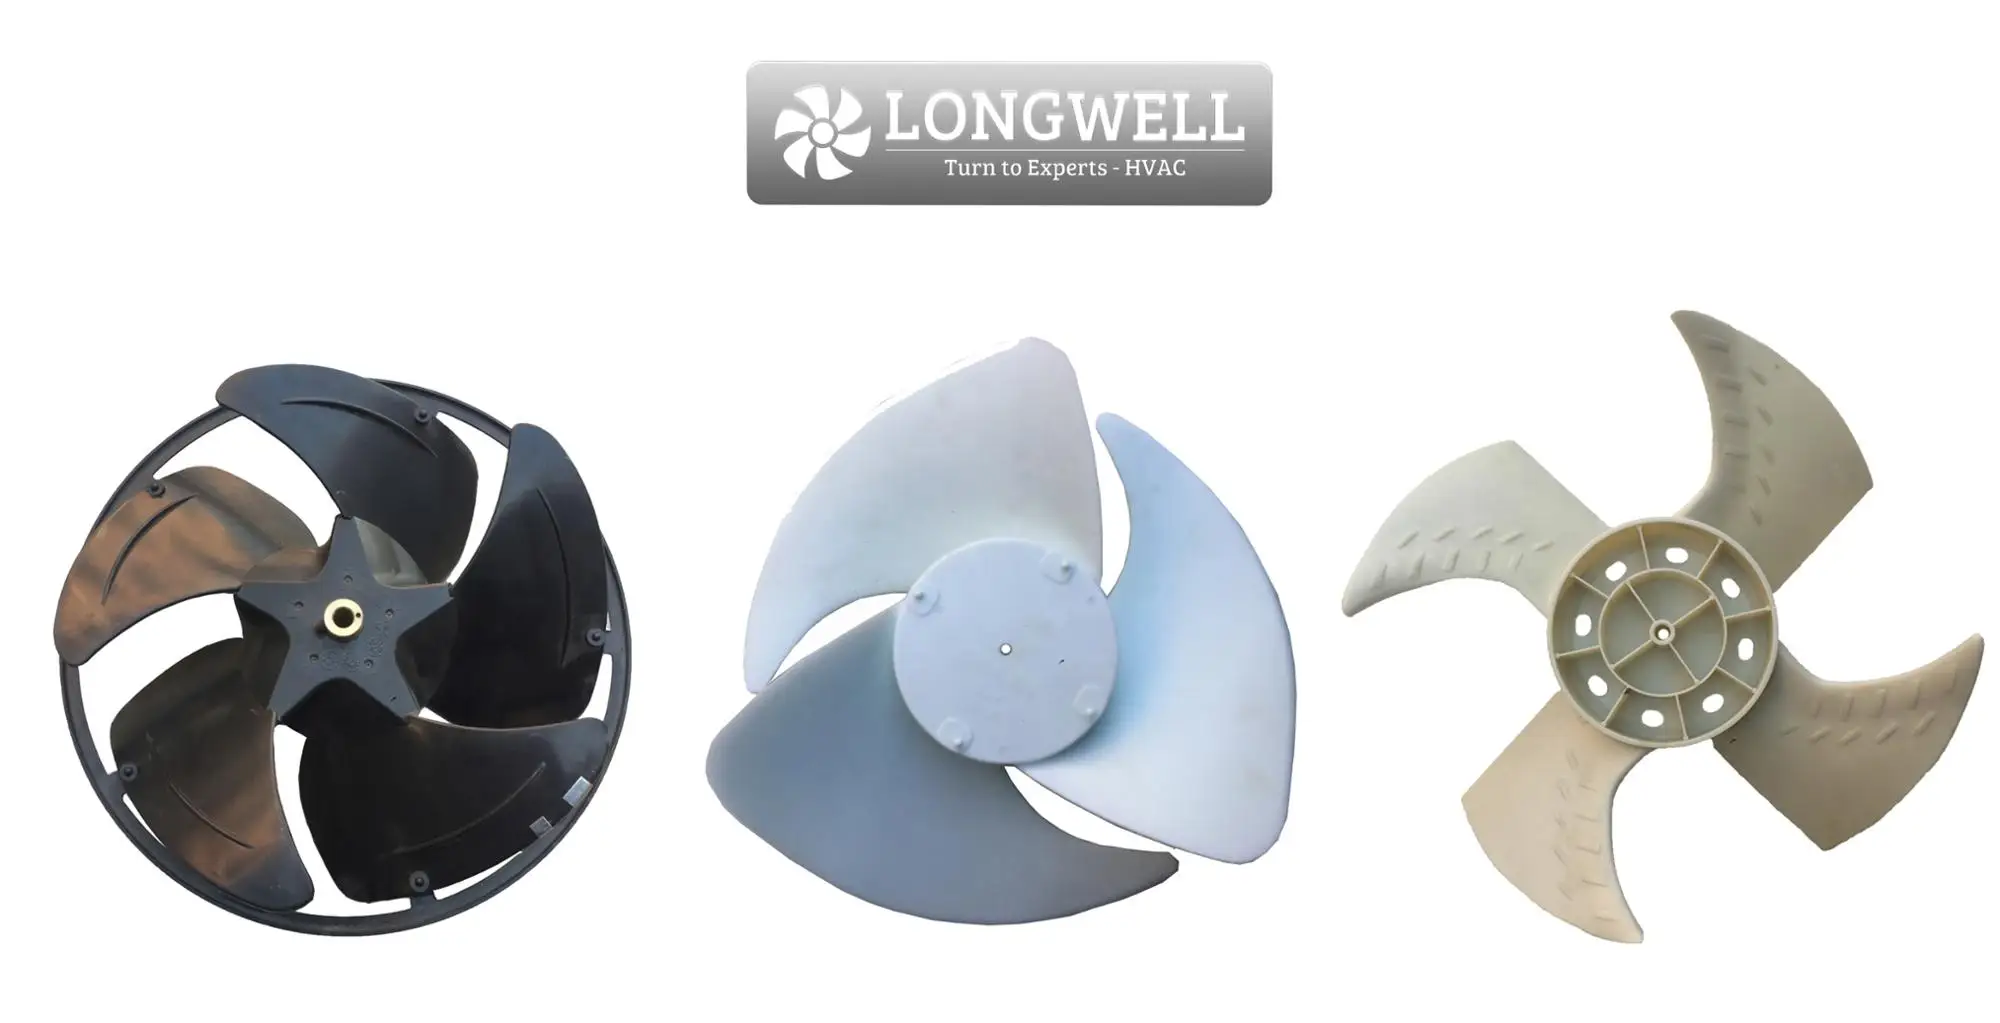 Lw420 80 Model Abs Plastic Fan Blades Cooling Fan Blades Replacement Fiberglass Fan Blades Manufacturers For Gree